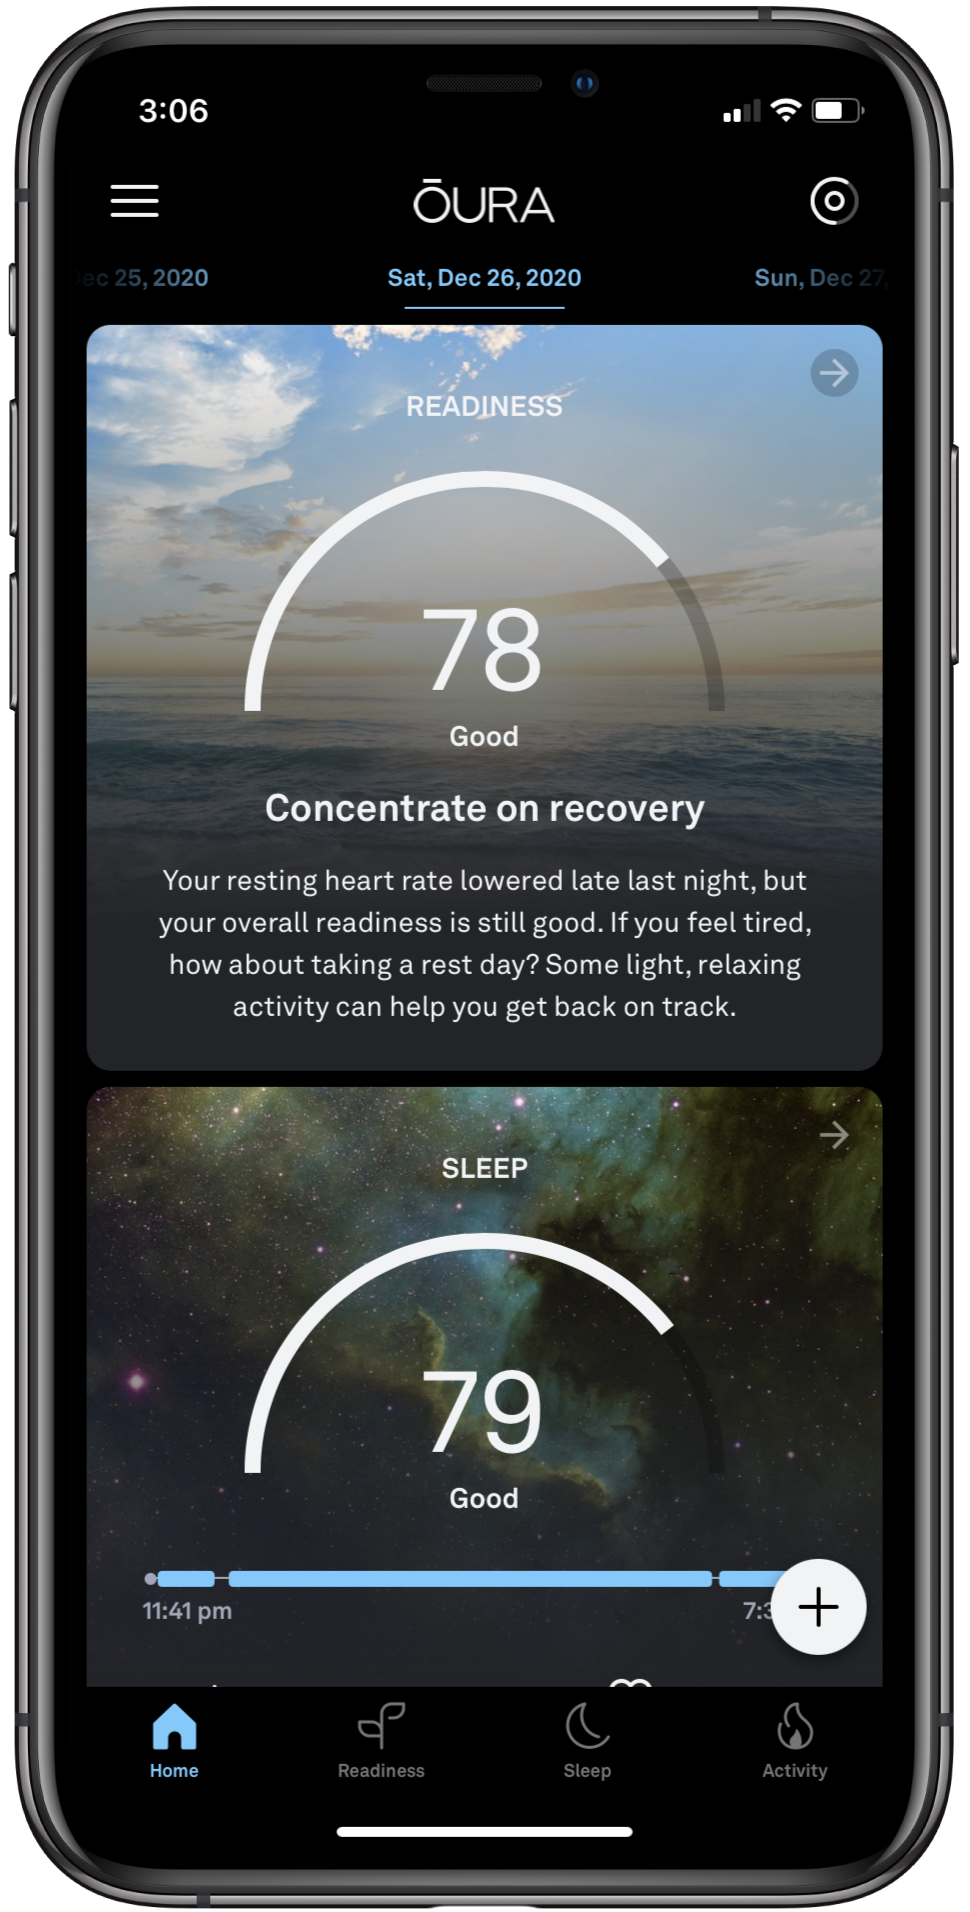 the oura app home tab, featuring the readiness and sleep cards. the readiness card includes a small summary text